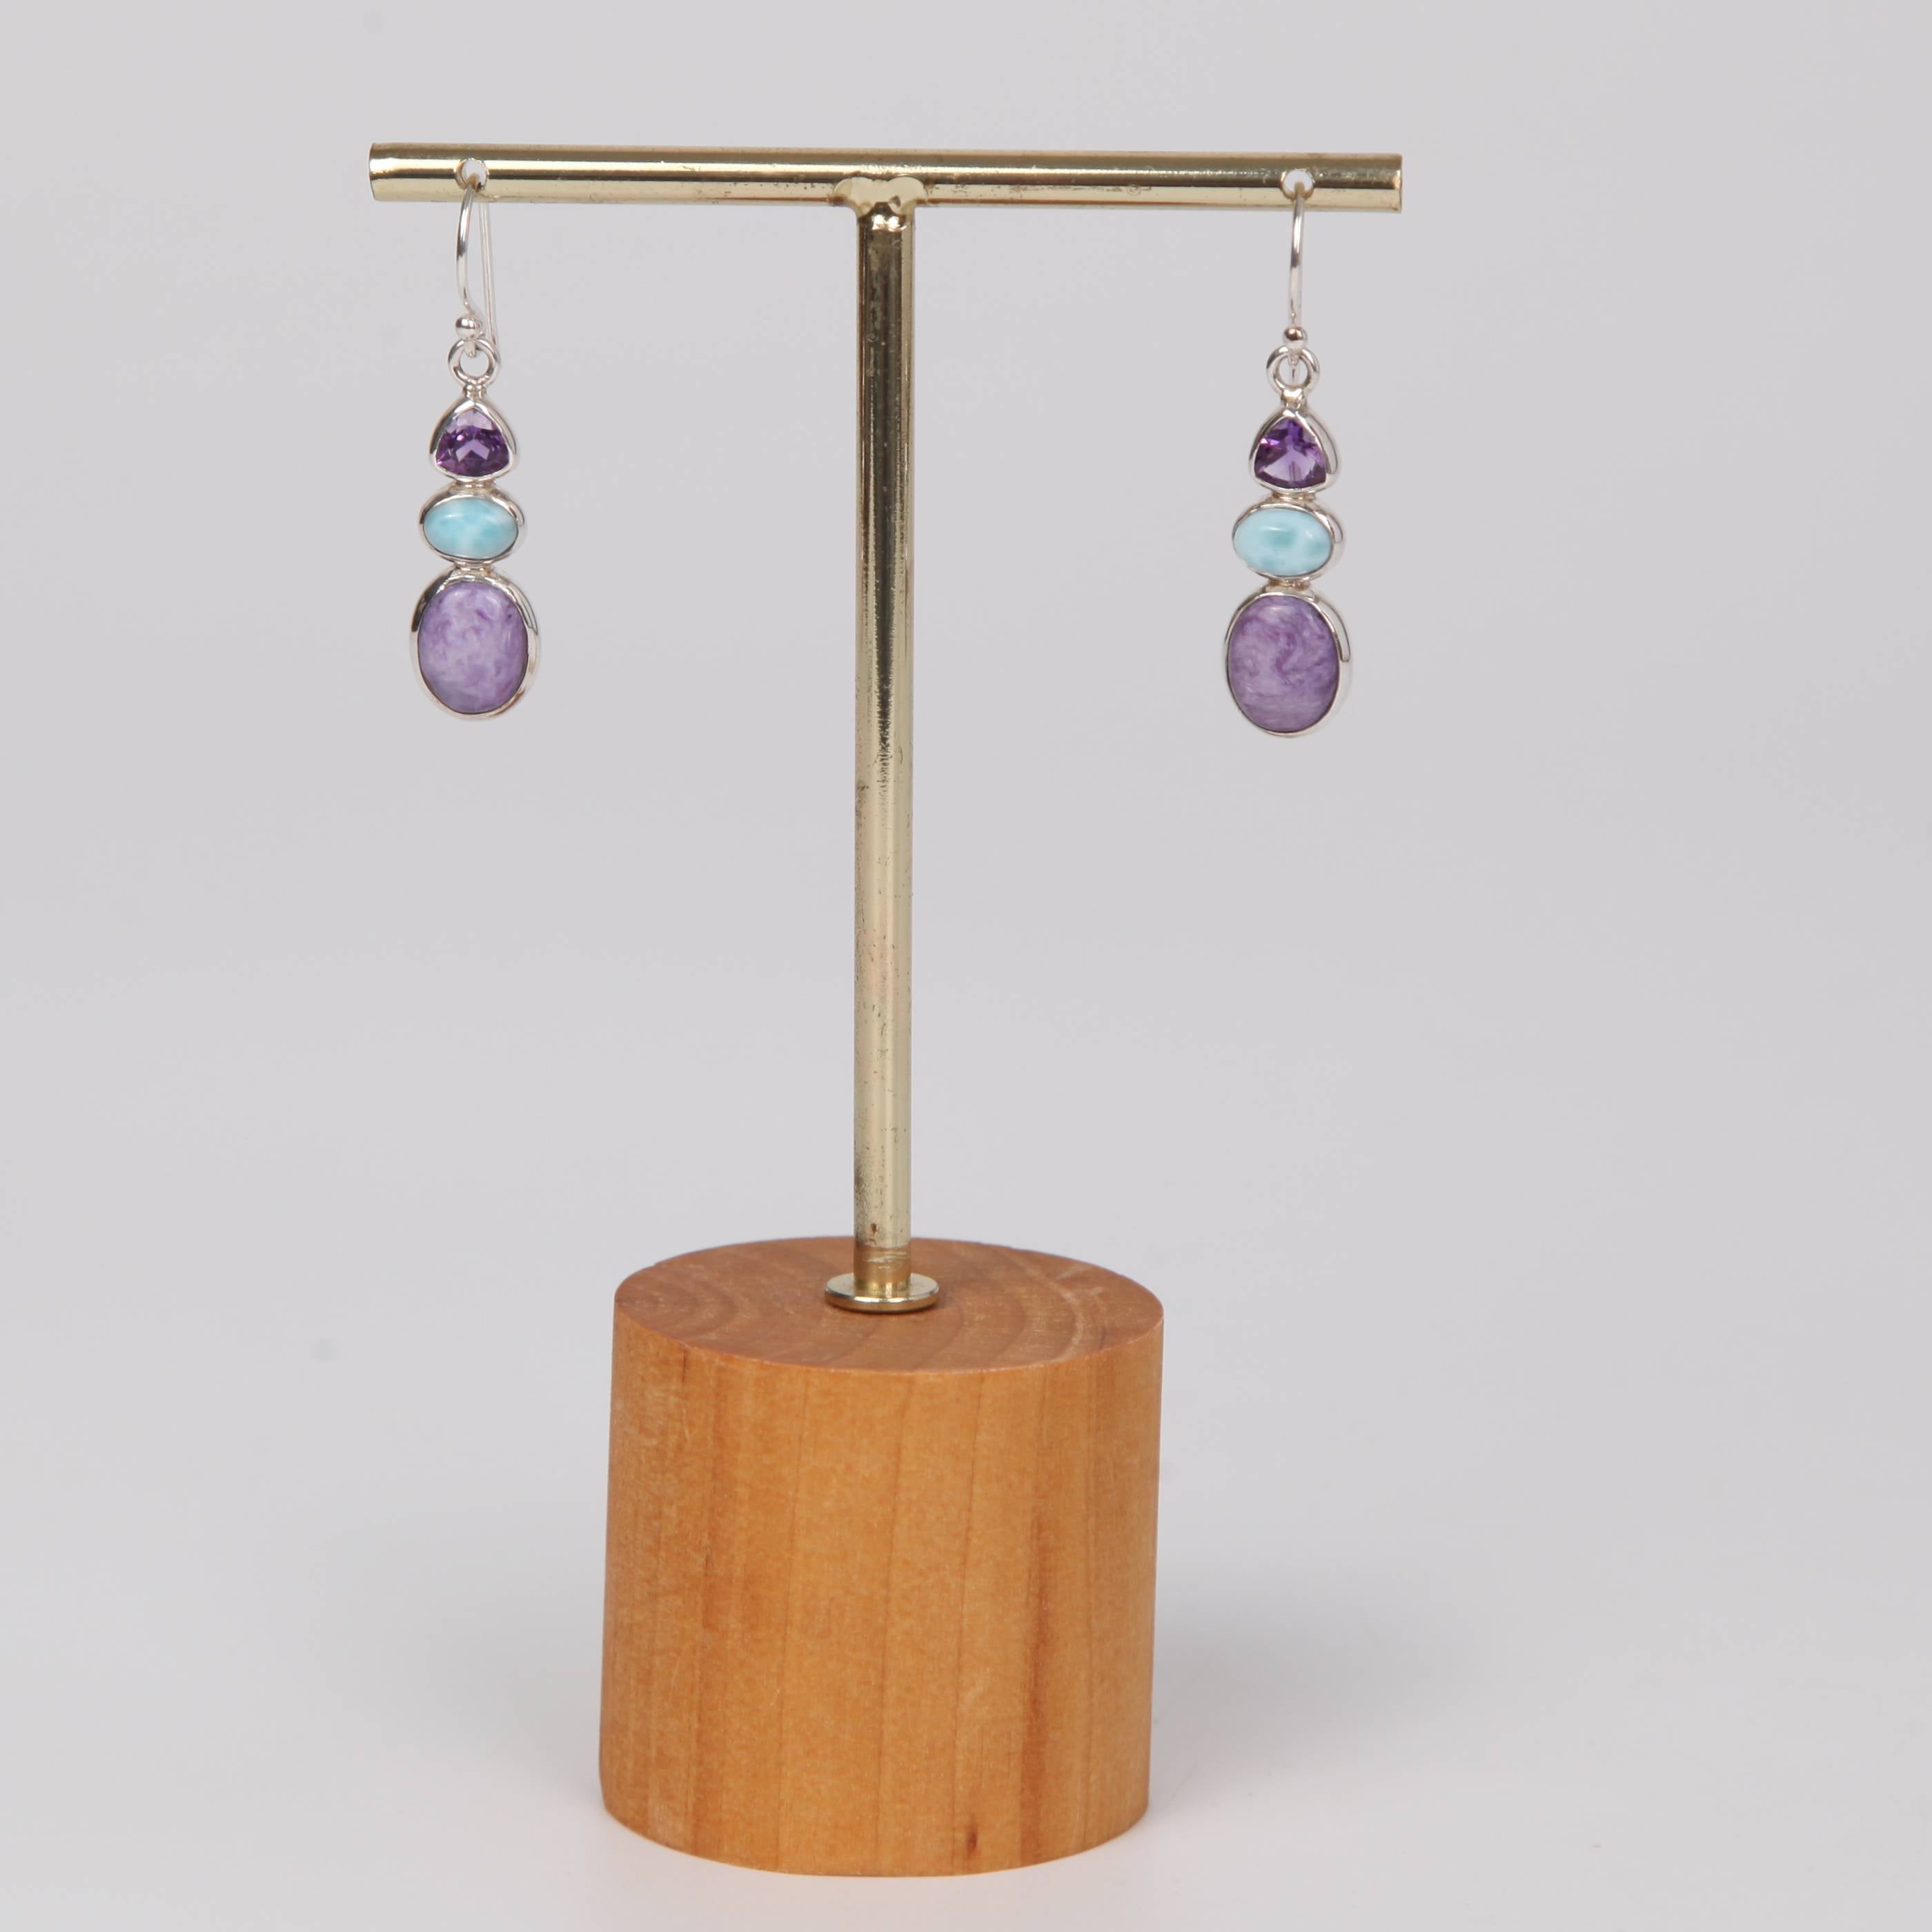 Chaorite Sterling Silver Earrings with Amethyst and Larimar Stone